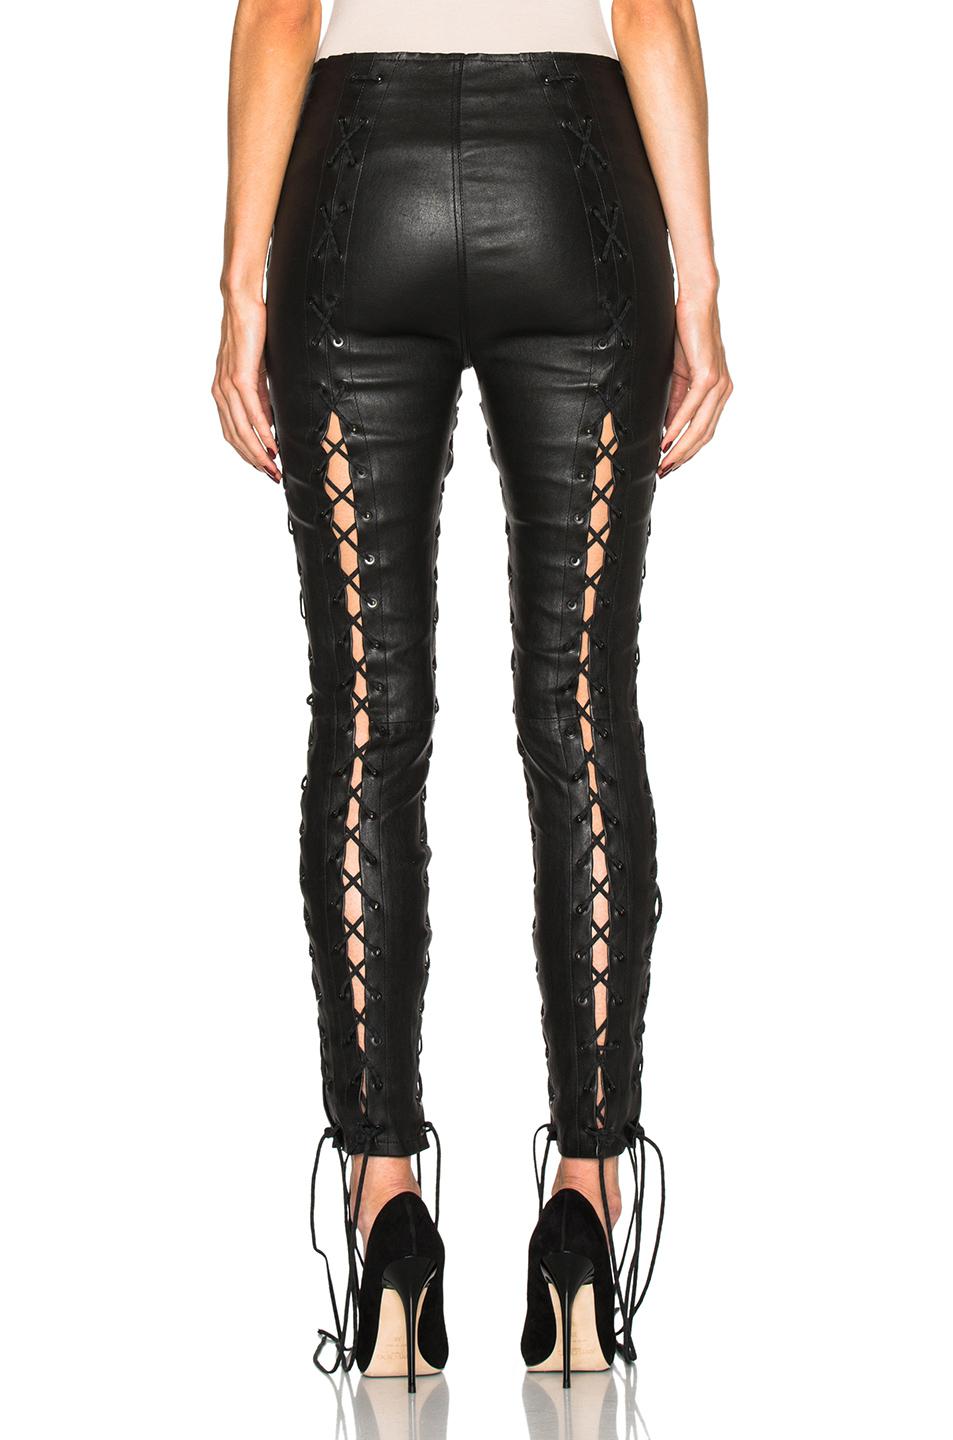 Unravel Project Lace Up Leather Pants in Black - Lyst